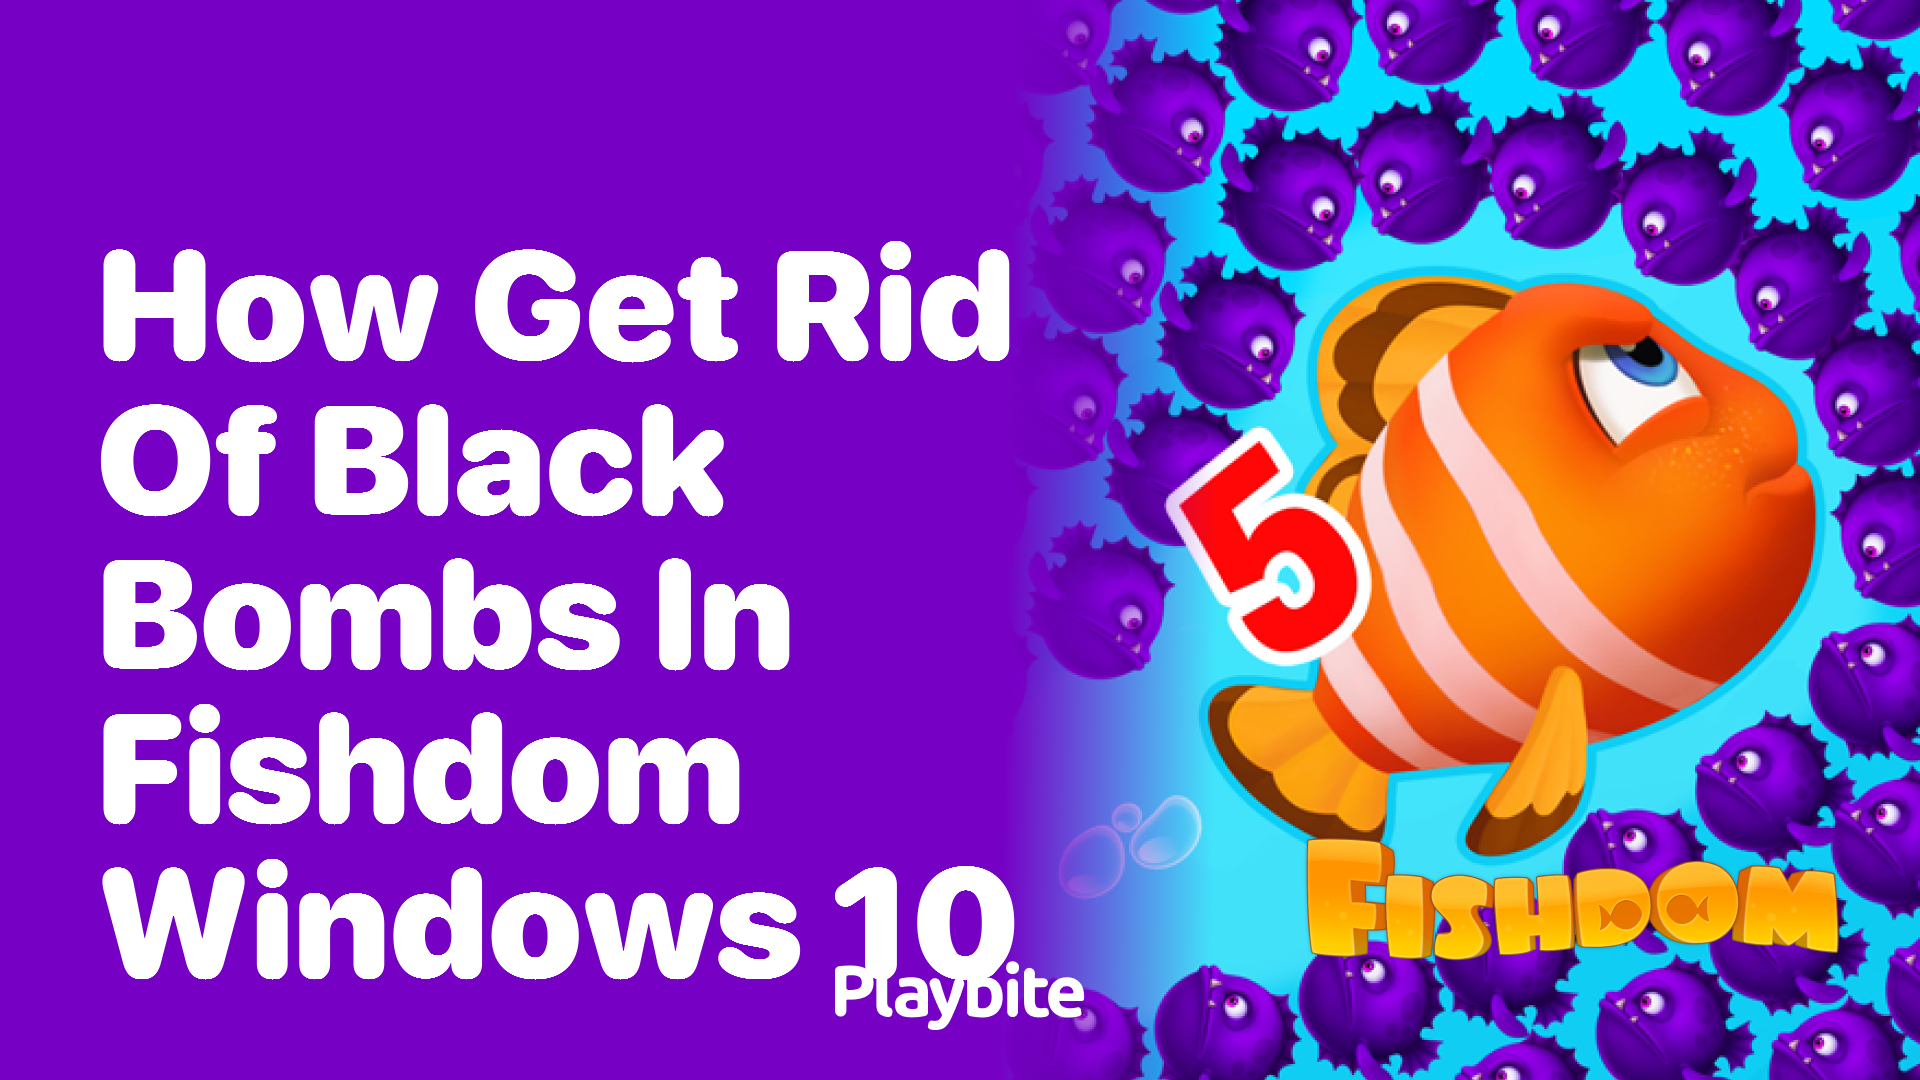 How to Get Rid of Black Bombs in Fishdom on Windows 10